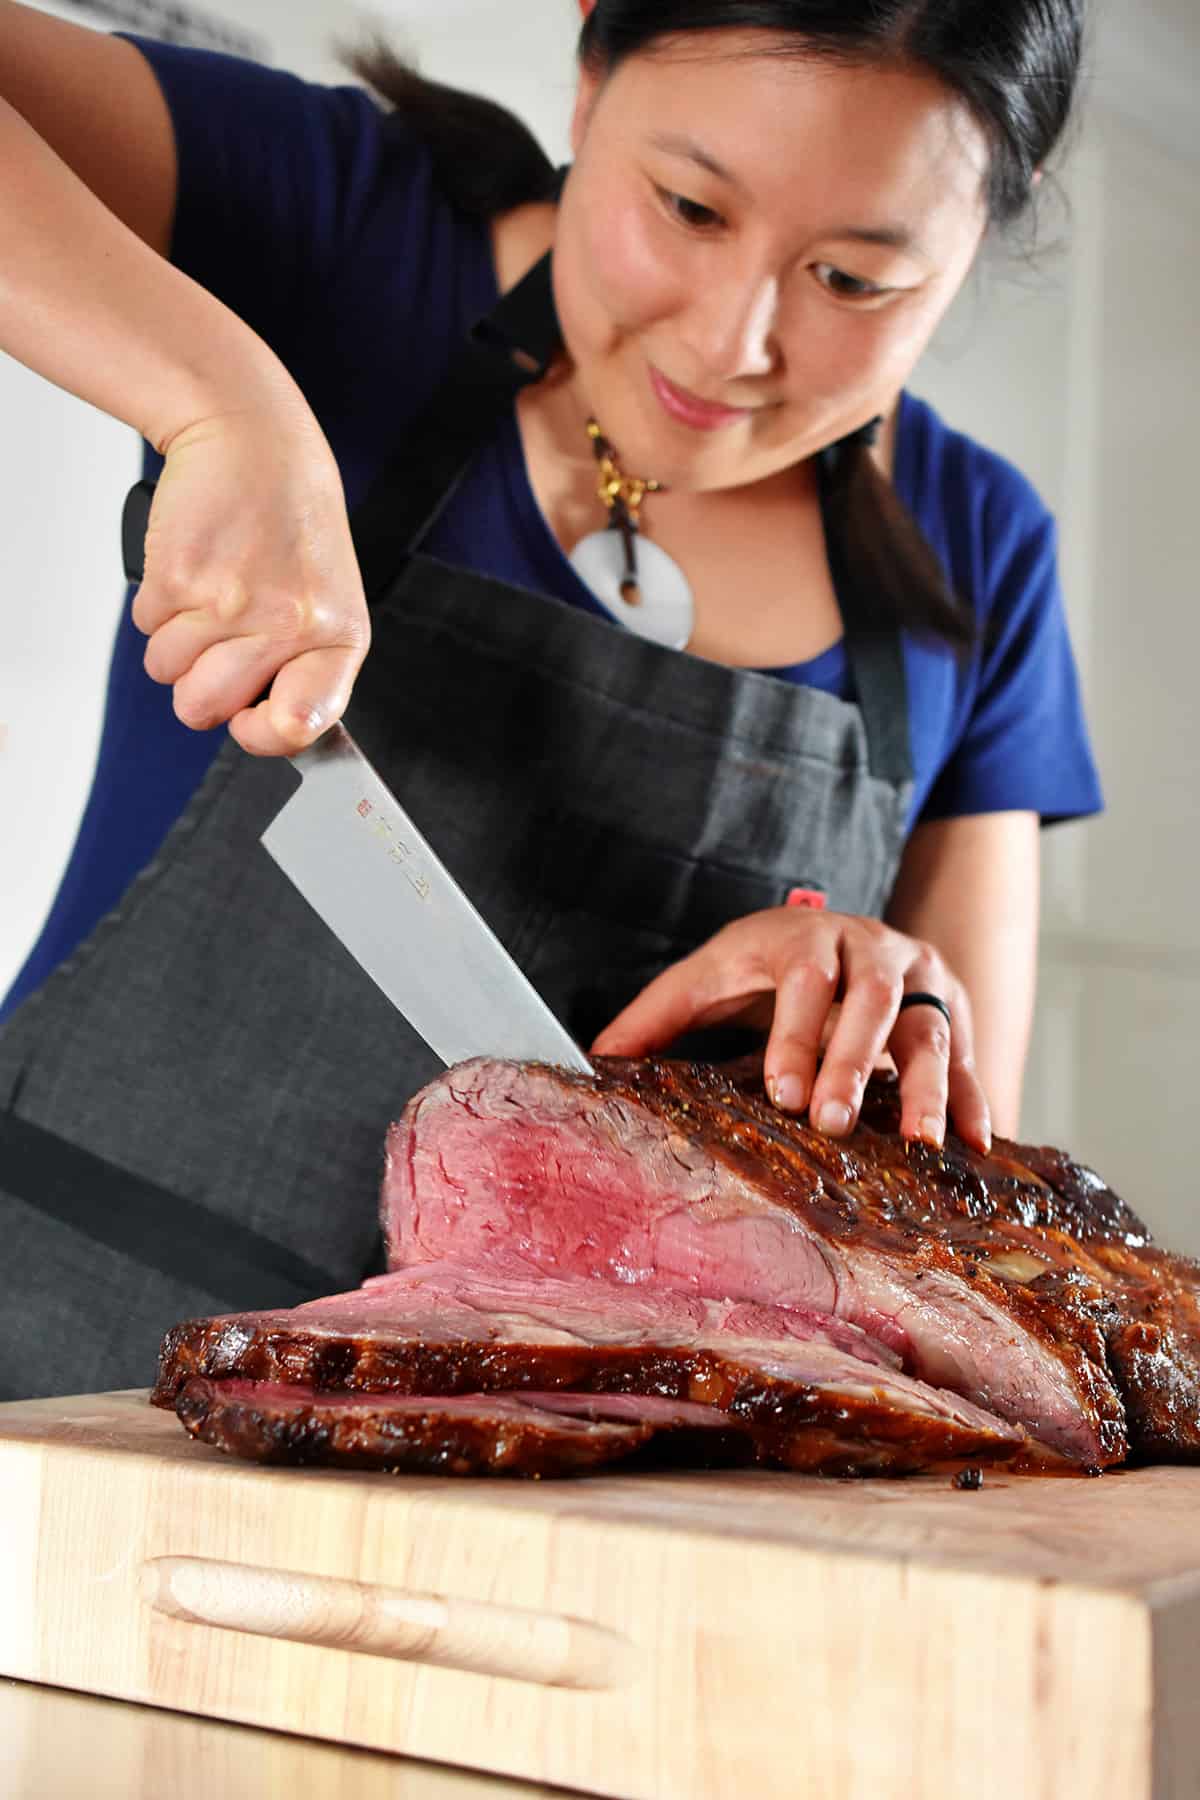 A smiling Asian woman slicing a medium rare prime rib roast into thin slices on a wooden cutting board.